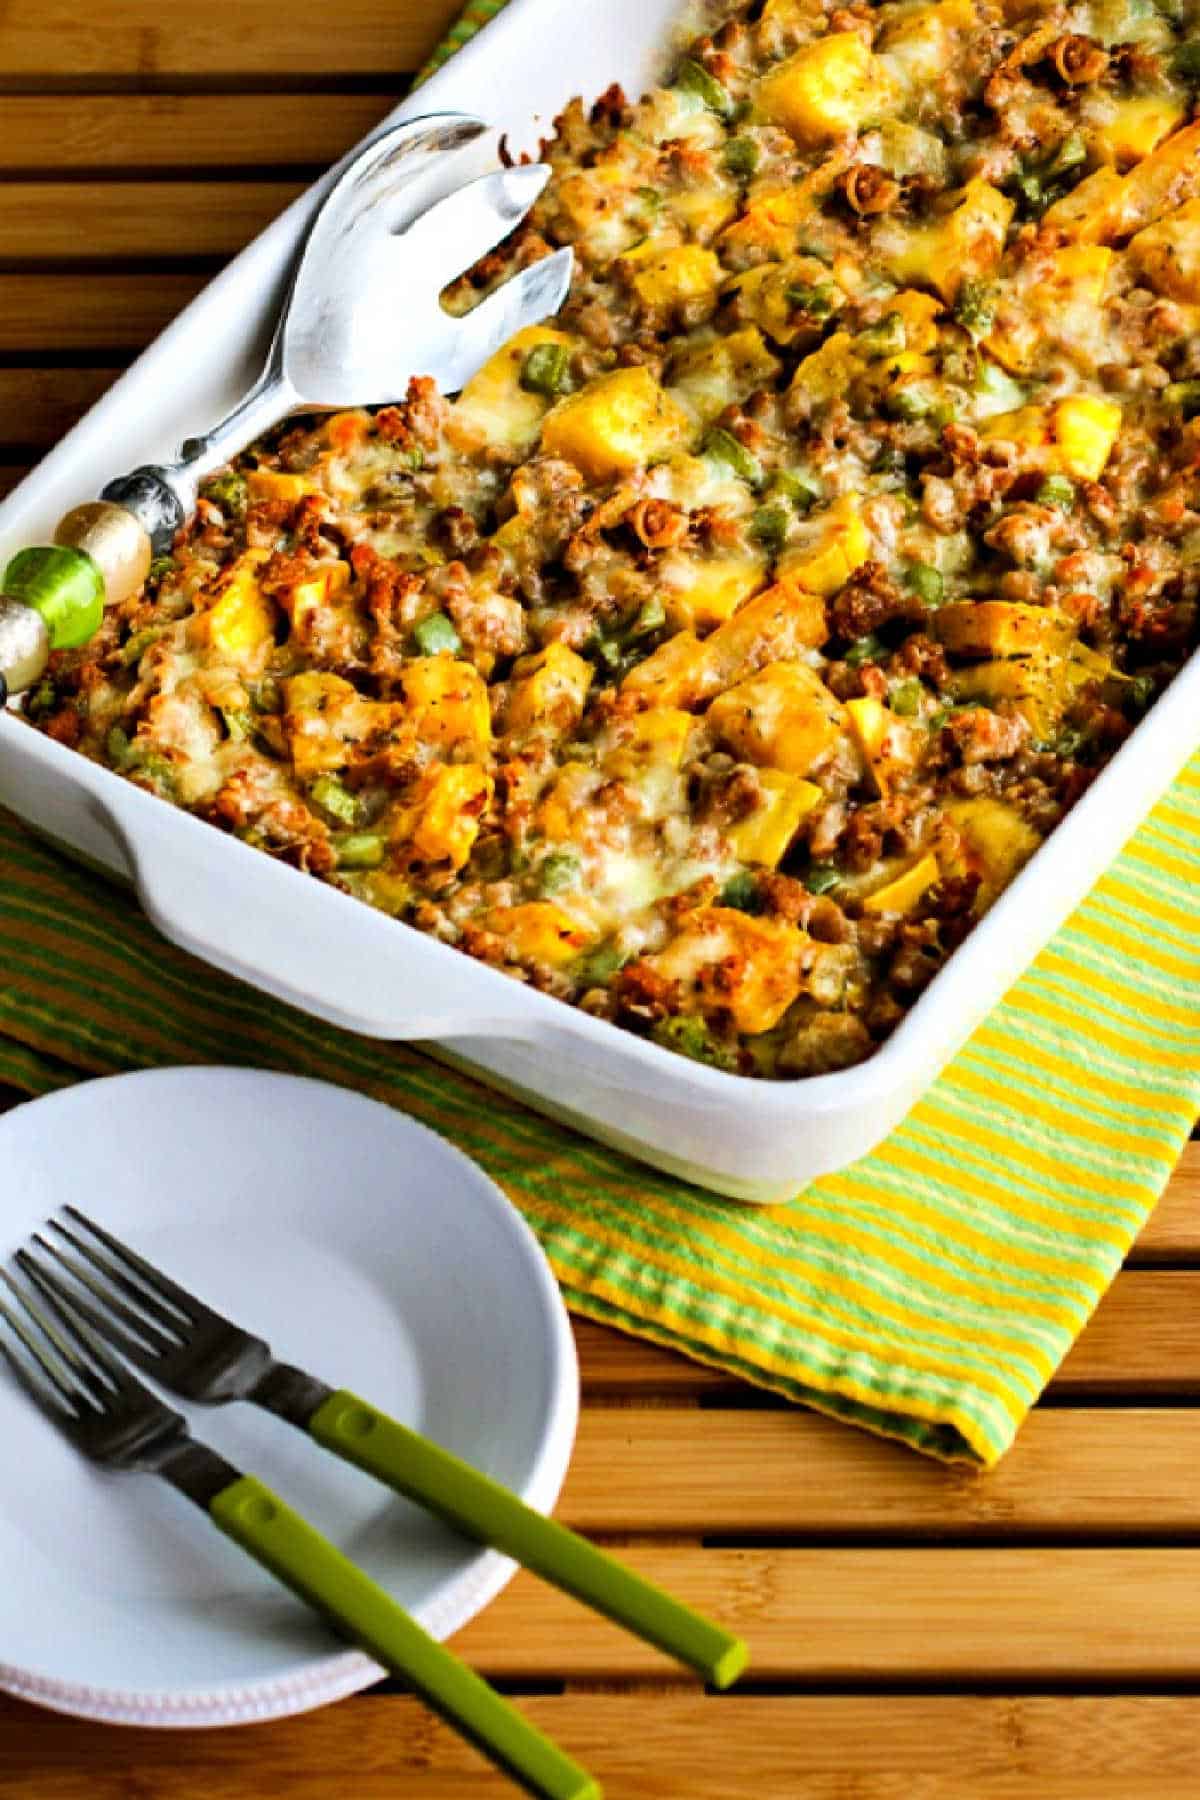 Delicata Squash and Sausage Gratin shown in baking dish with plates, forks, and serving spoon